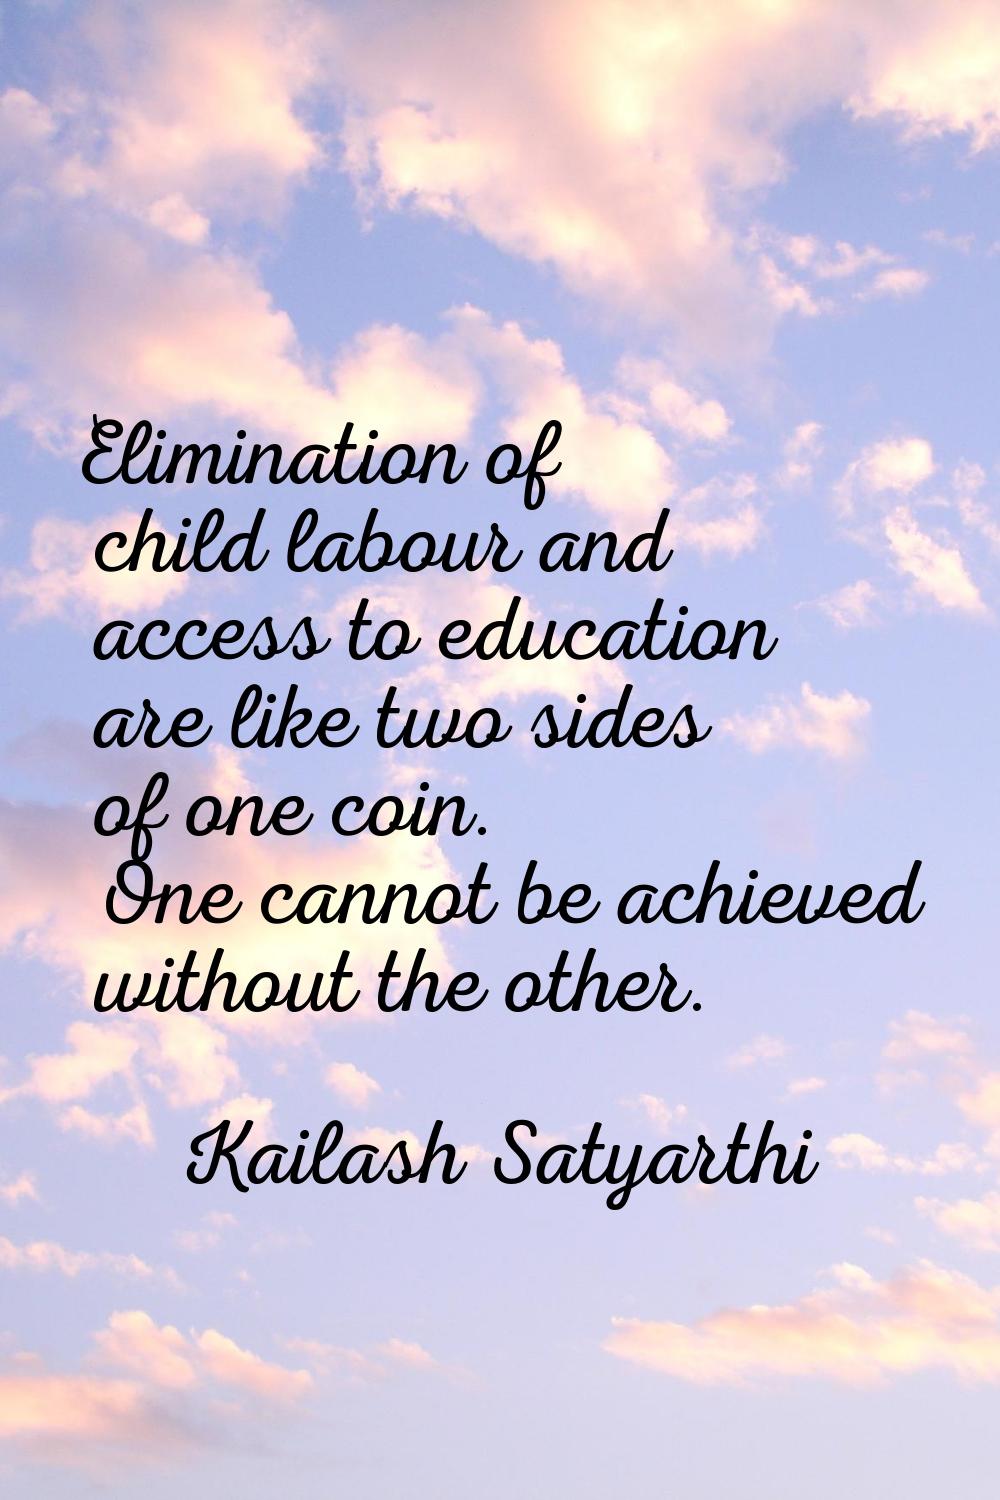 Elimination of child labour and access to education are like two sides of one coin. One cannot be a